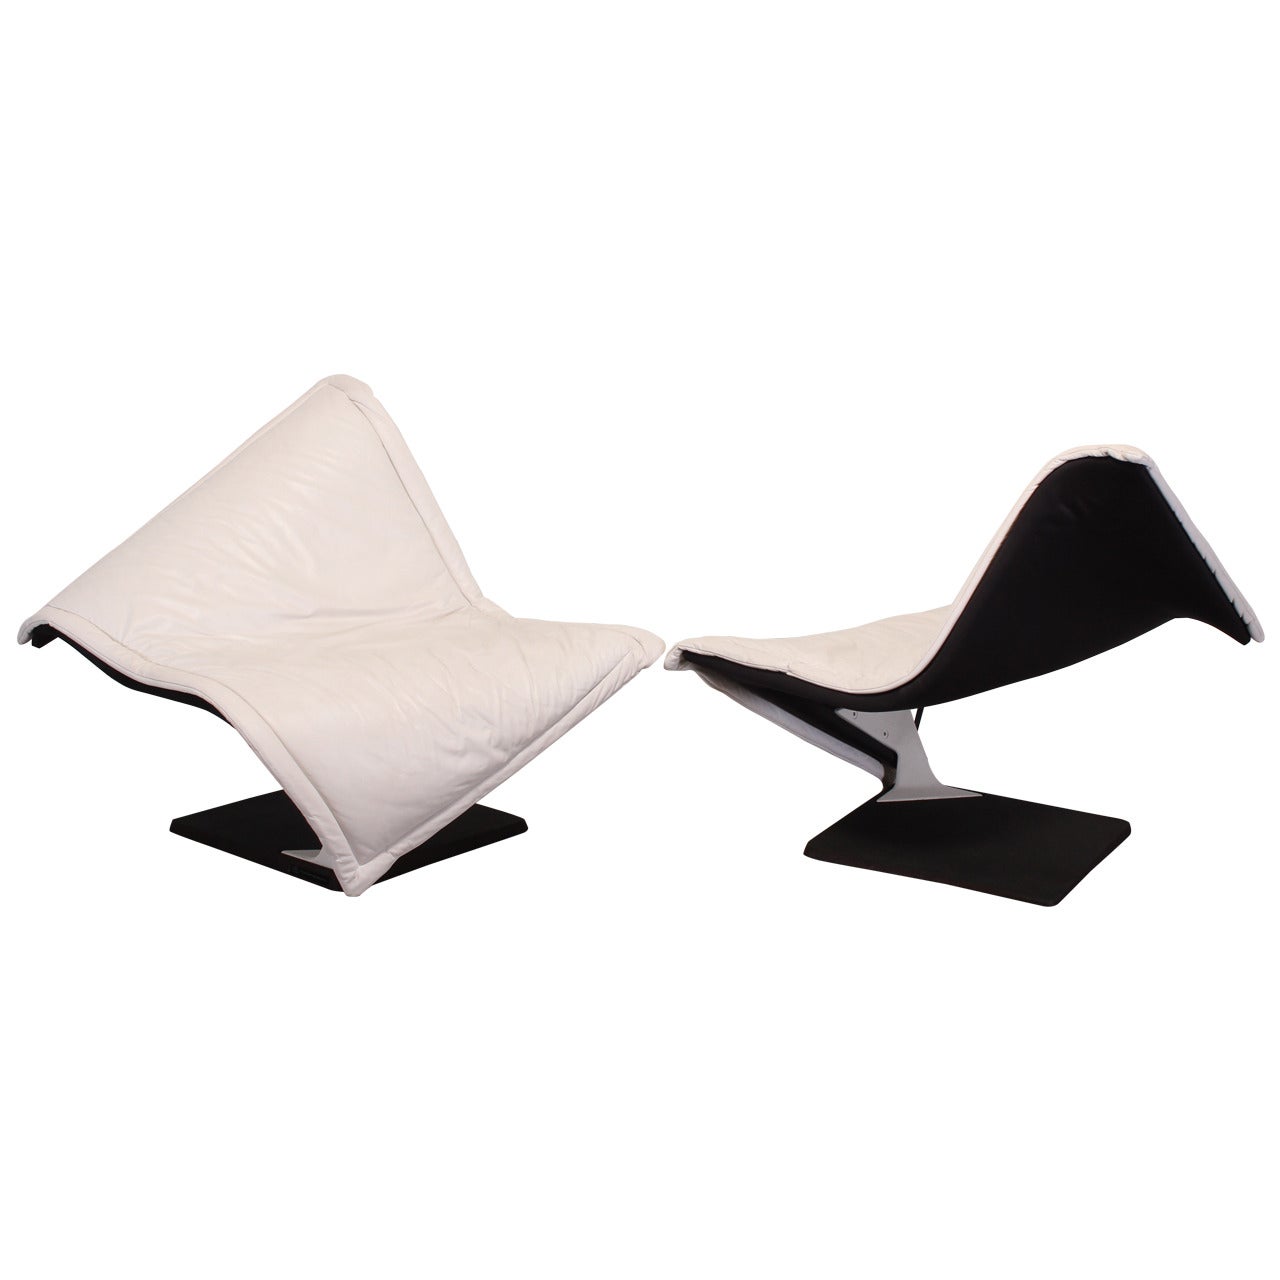 Pair of Leather "Flying Carpet Chairs" by Simon Desanta for Rosenthal, 1988